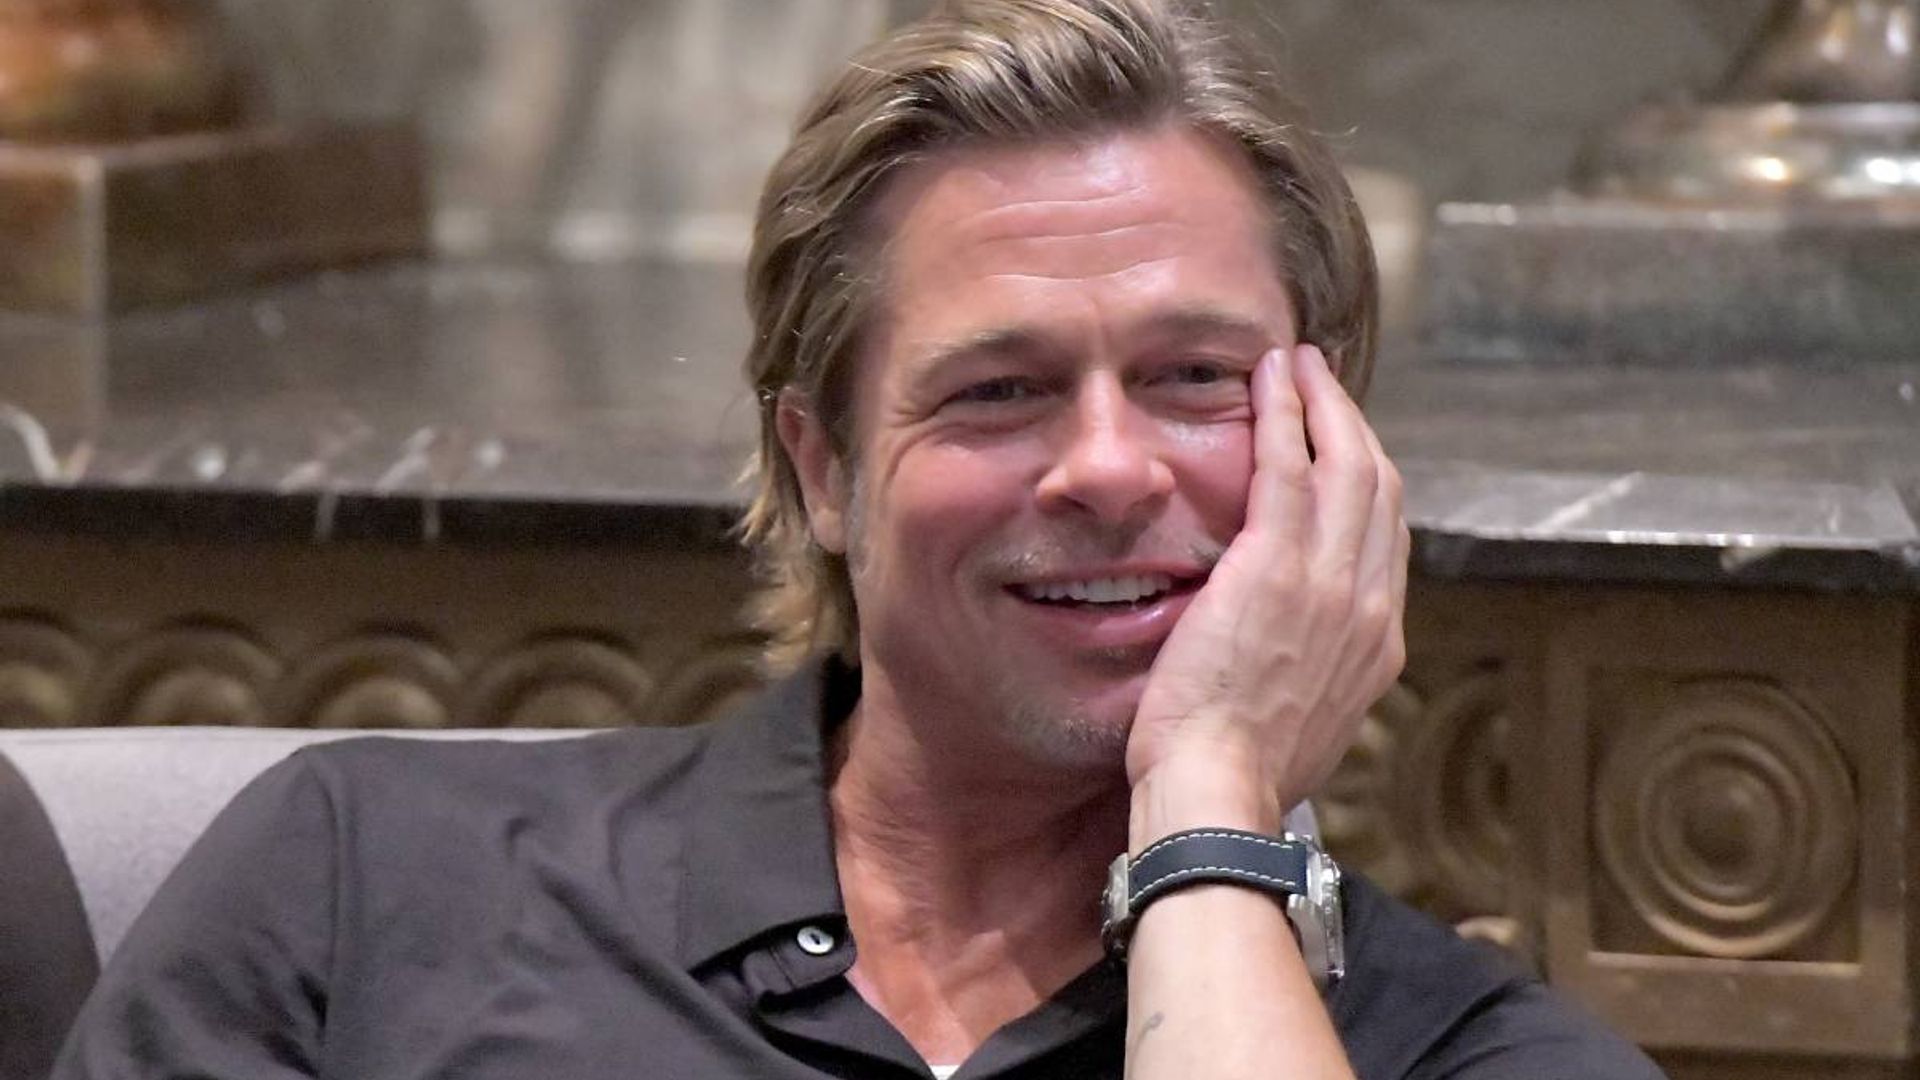 Brad Pitt as you've never seen him before as star reveals his daily routine